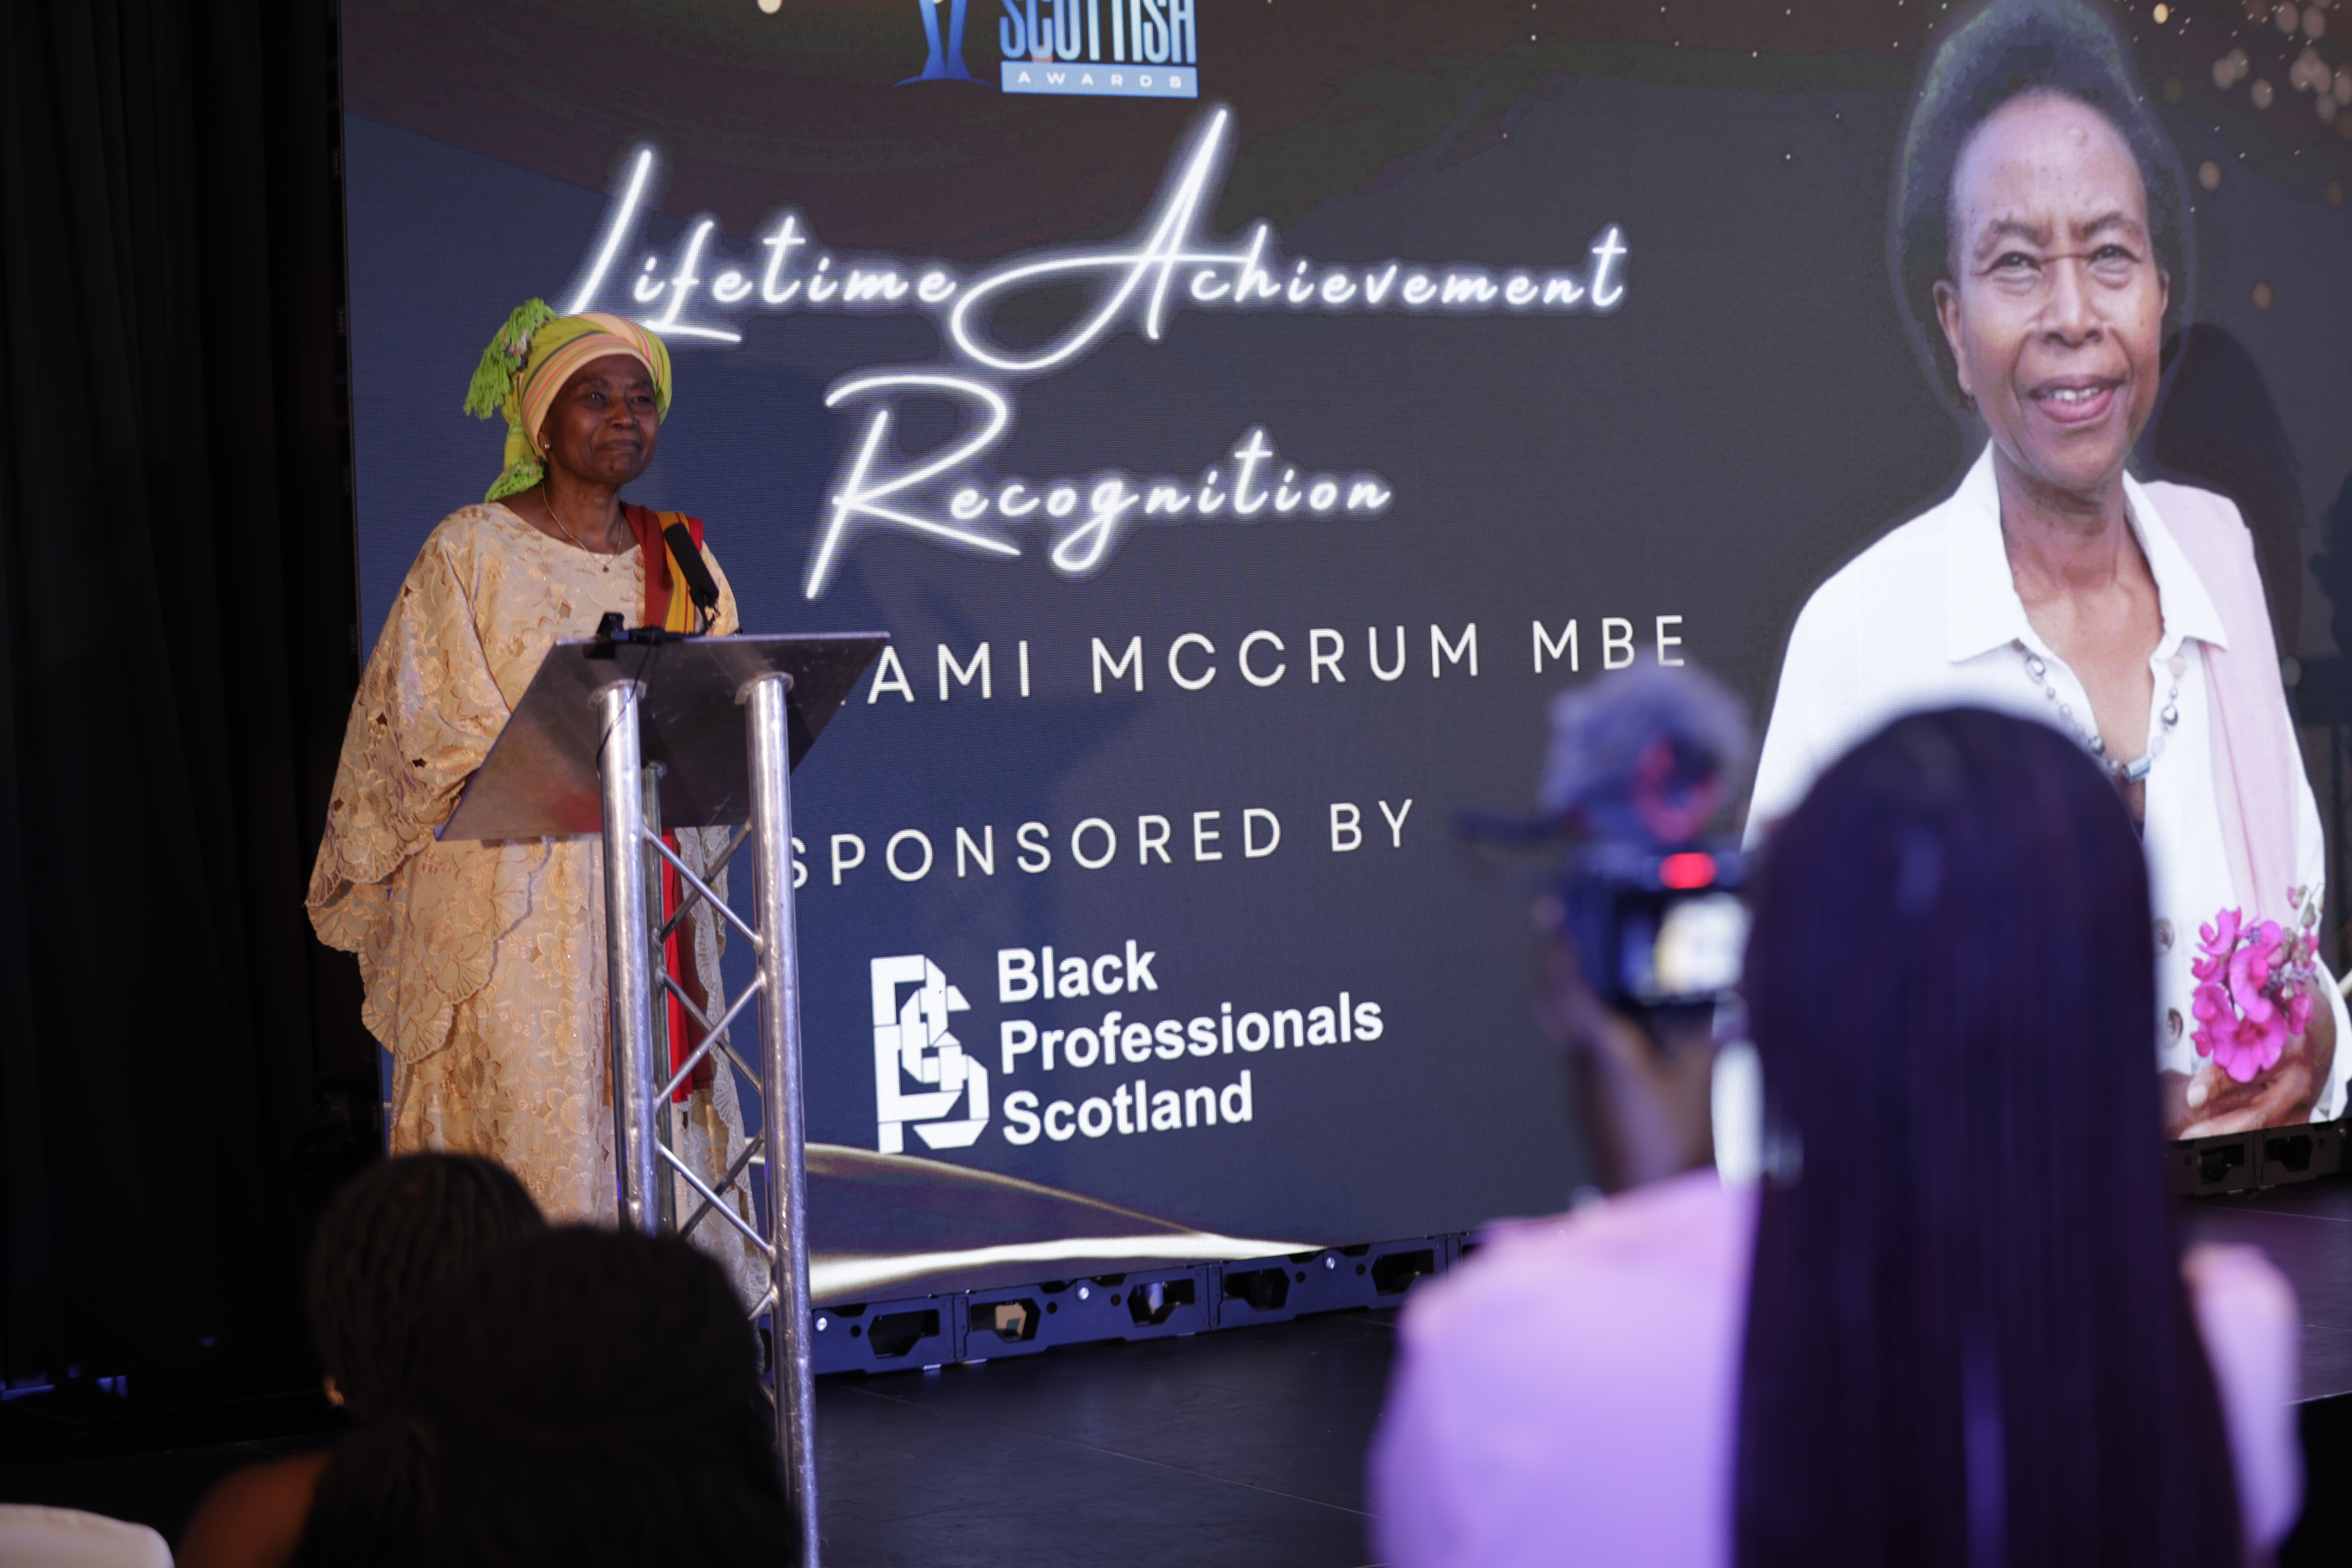 Mukami McCrum MBE accepting her Lifetime Achievement Recognition award